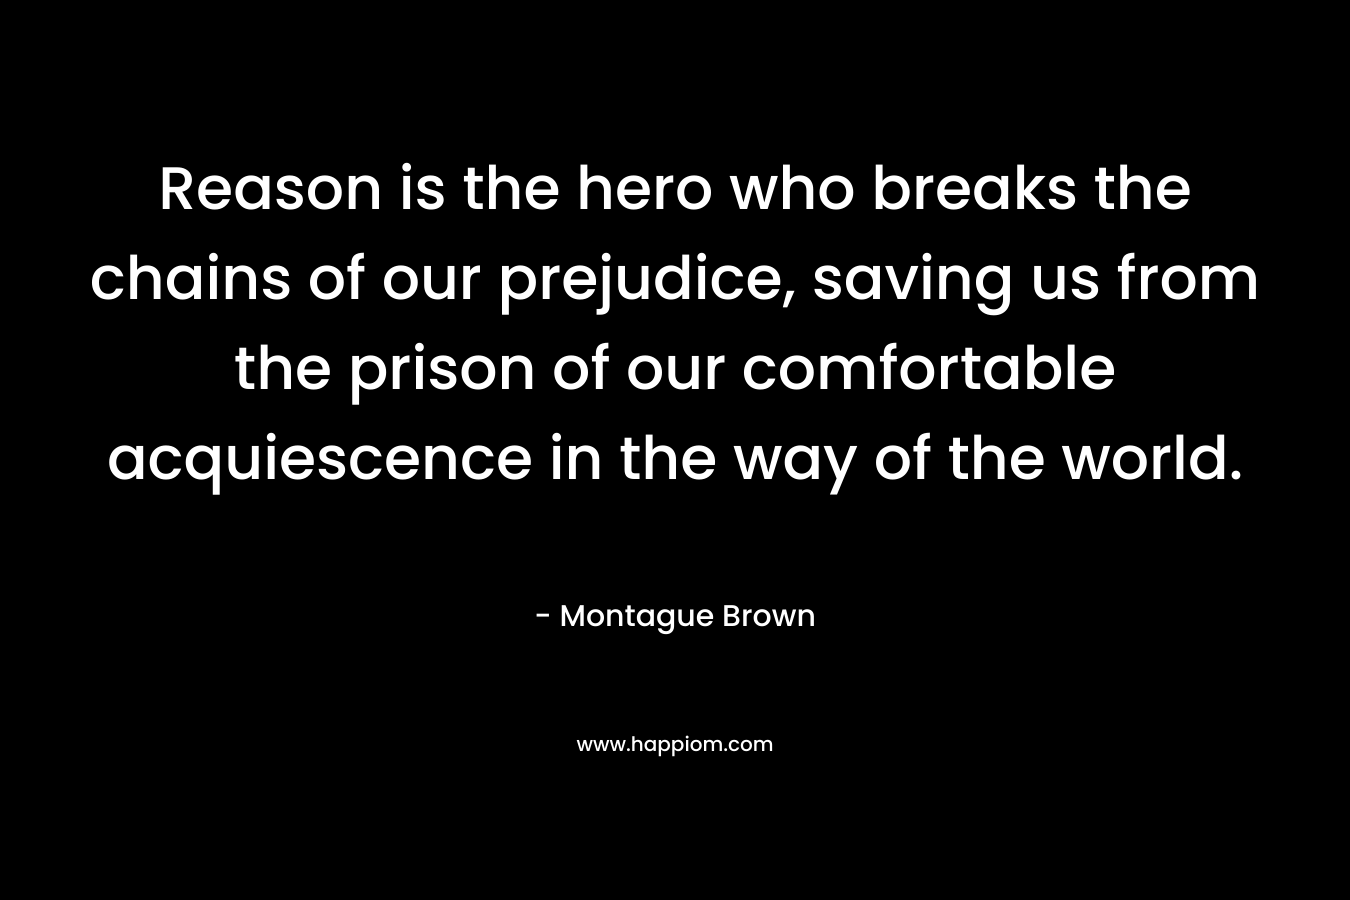 Reason is the hero who breaks the chains of our prejudice, saving us from the prison of our comfortable acquiescence in the way of the world.